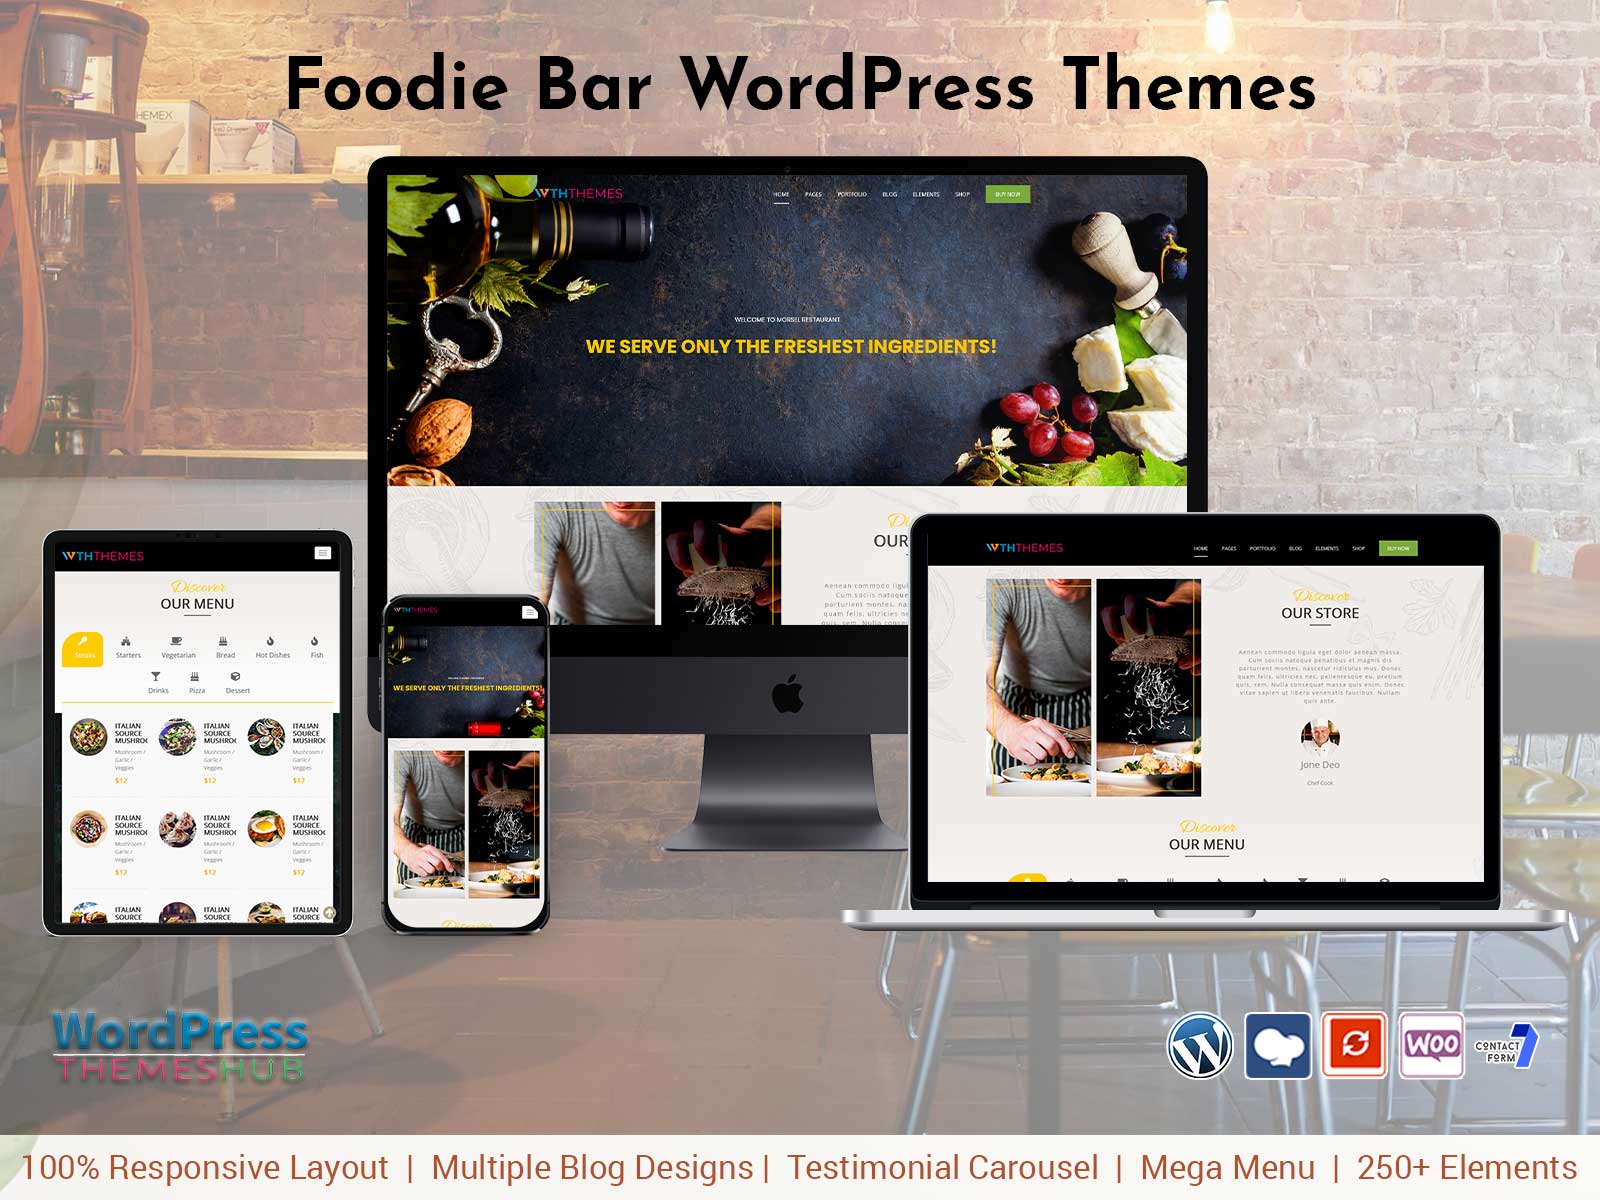 Foodie Bar WordPress Themes For Food Bloggers, And Food-related Website